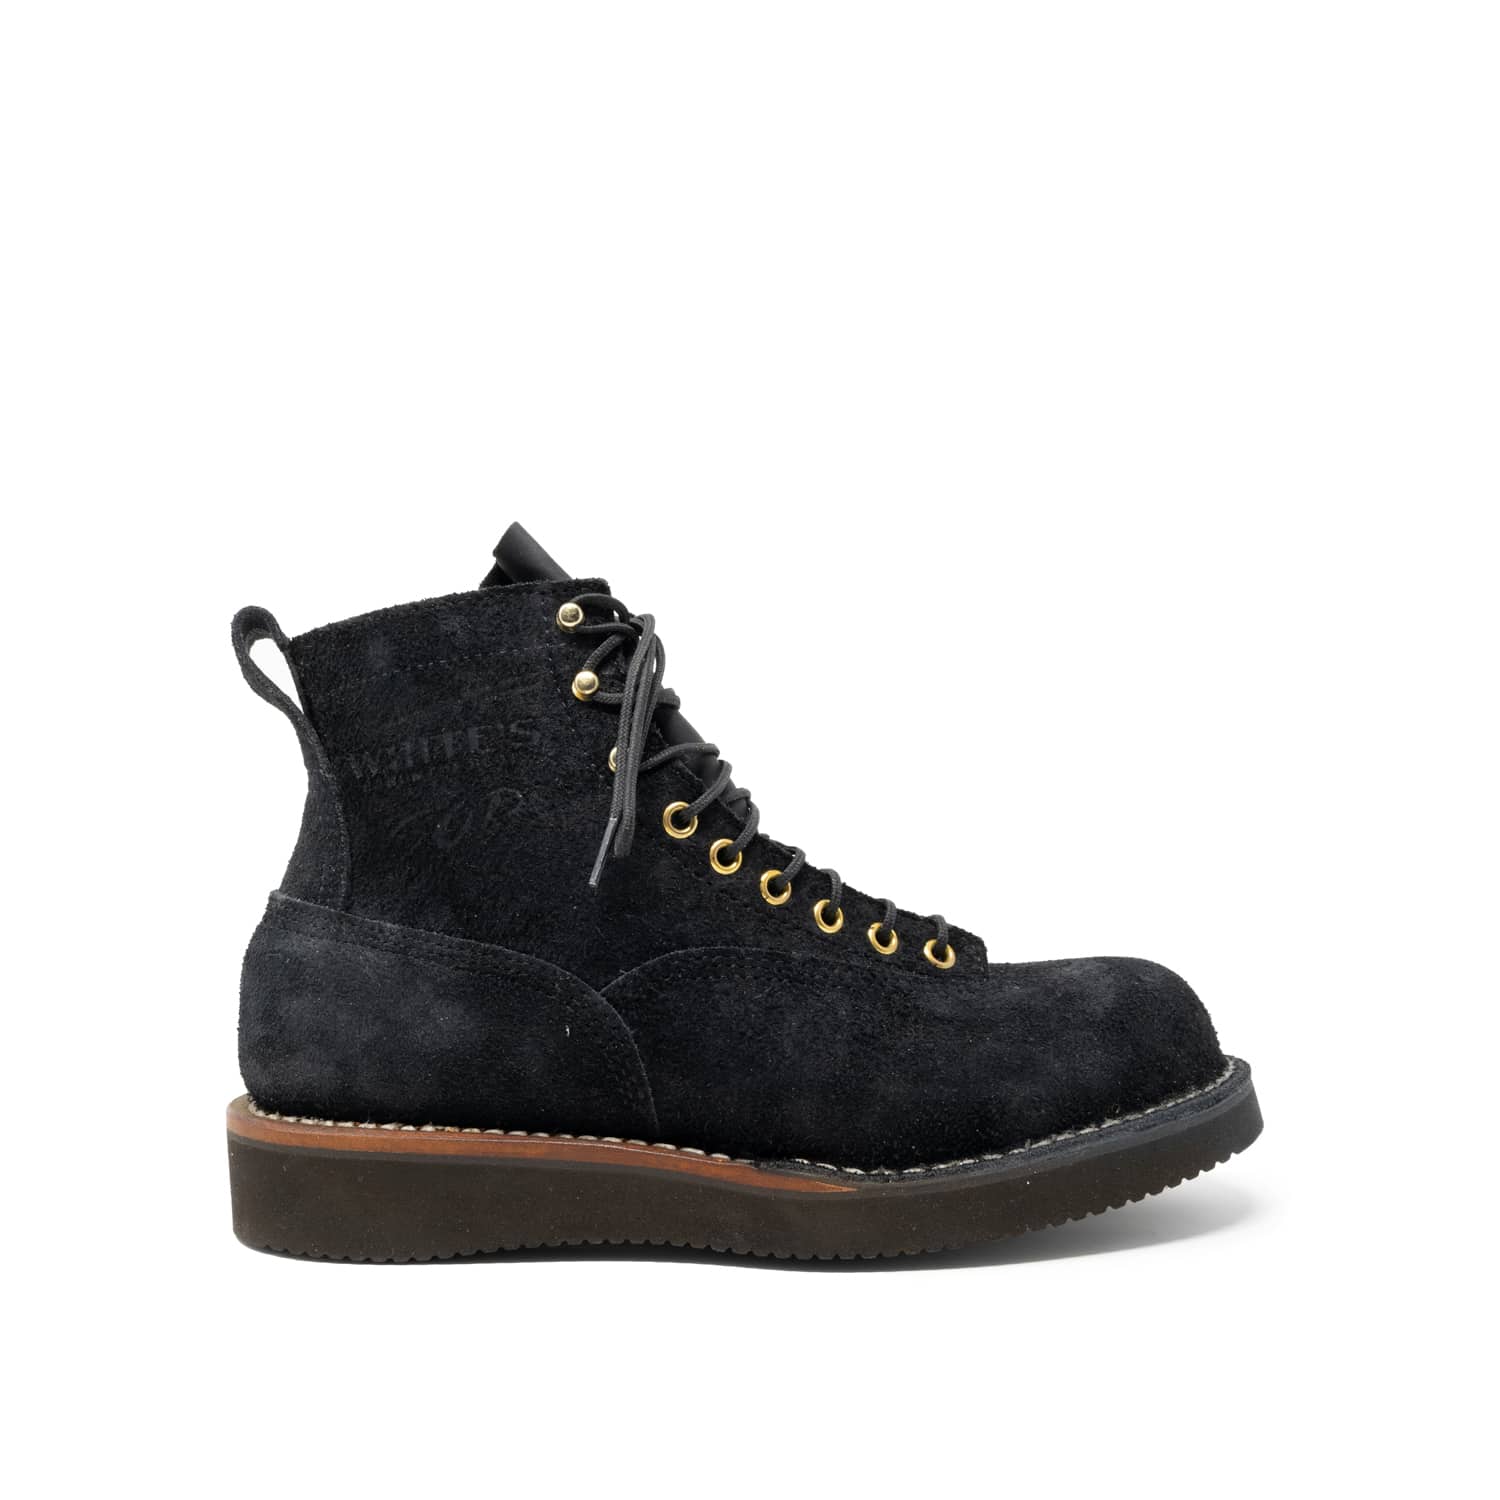 White's Boots x SOP Big Shooter Boot Black Roughout